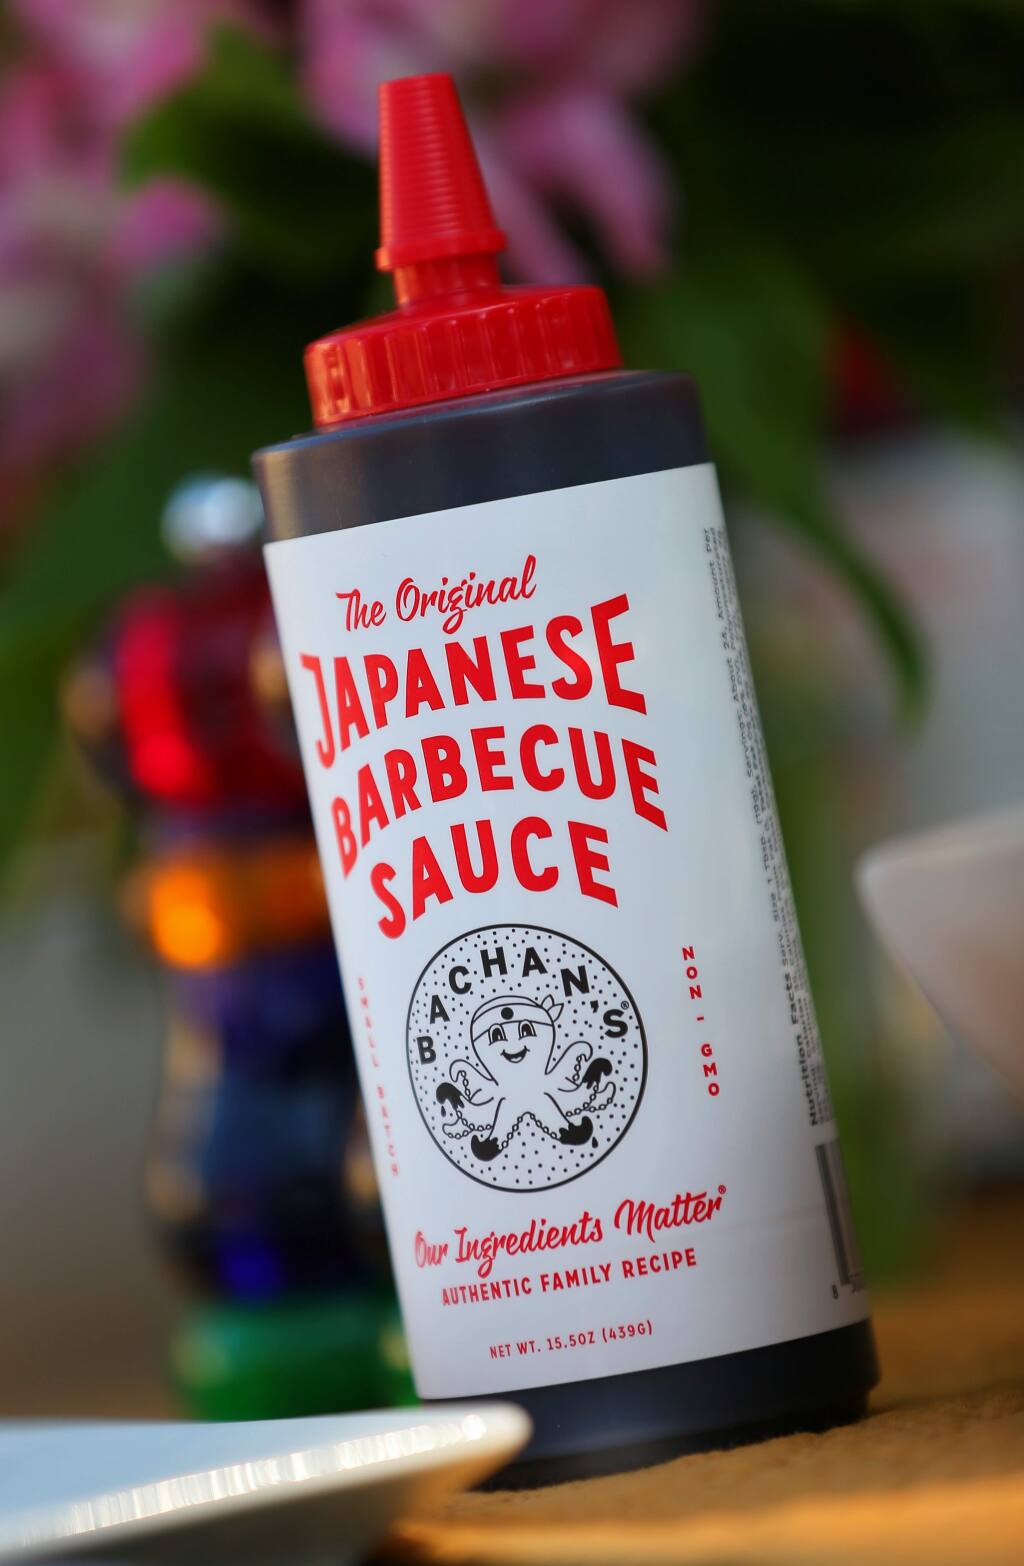 Bachan's Japanese Barbecue Sauce: Justin Gill of Sebastopol launched the teriyaki sauce, based on his grandmother's recipe, in 2013. It's now sold online, at Asian grocery stores and local markets. (Christopher Chung/ The Press Democrat)